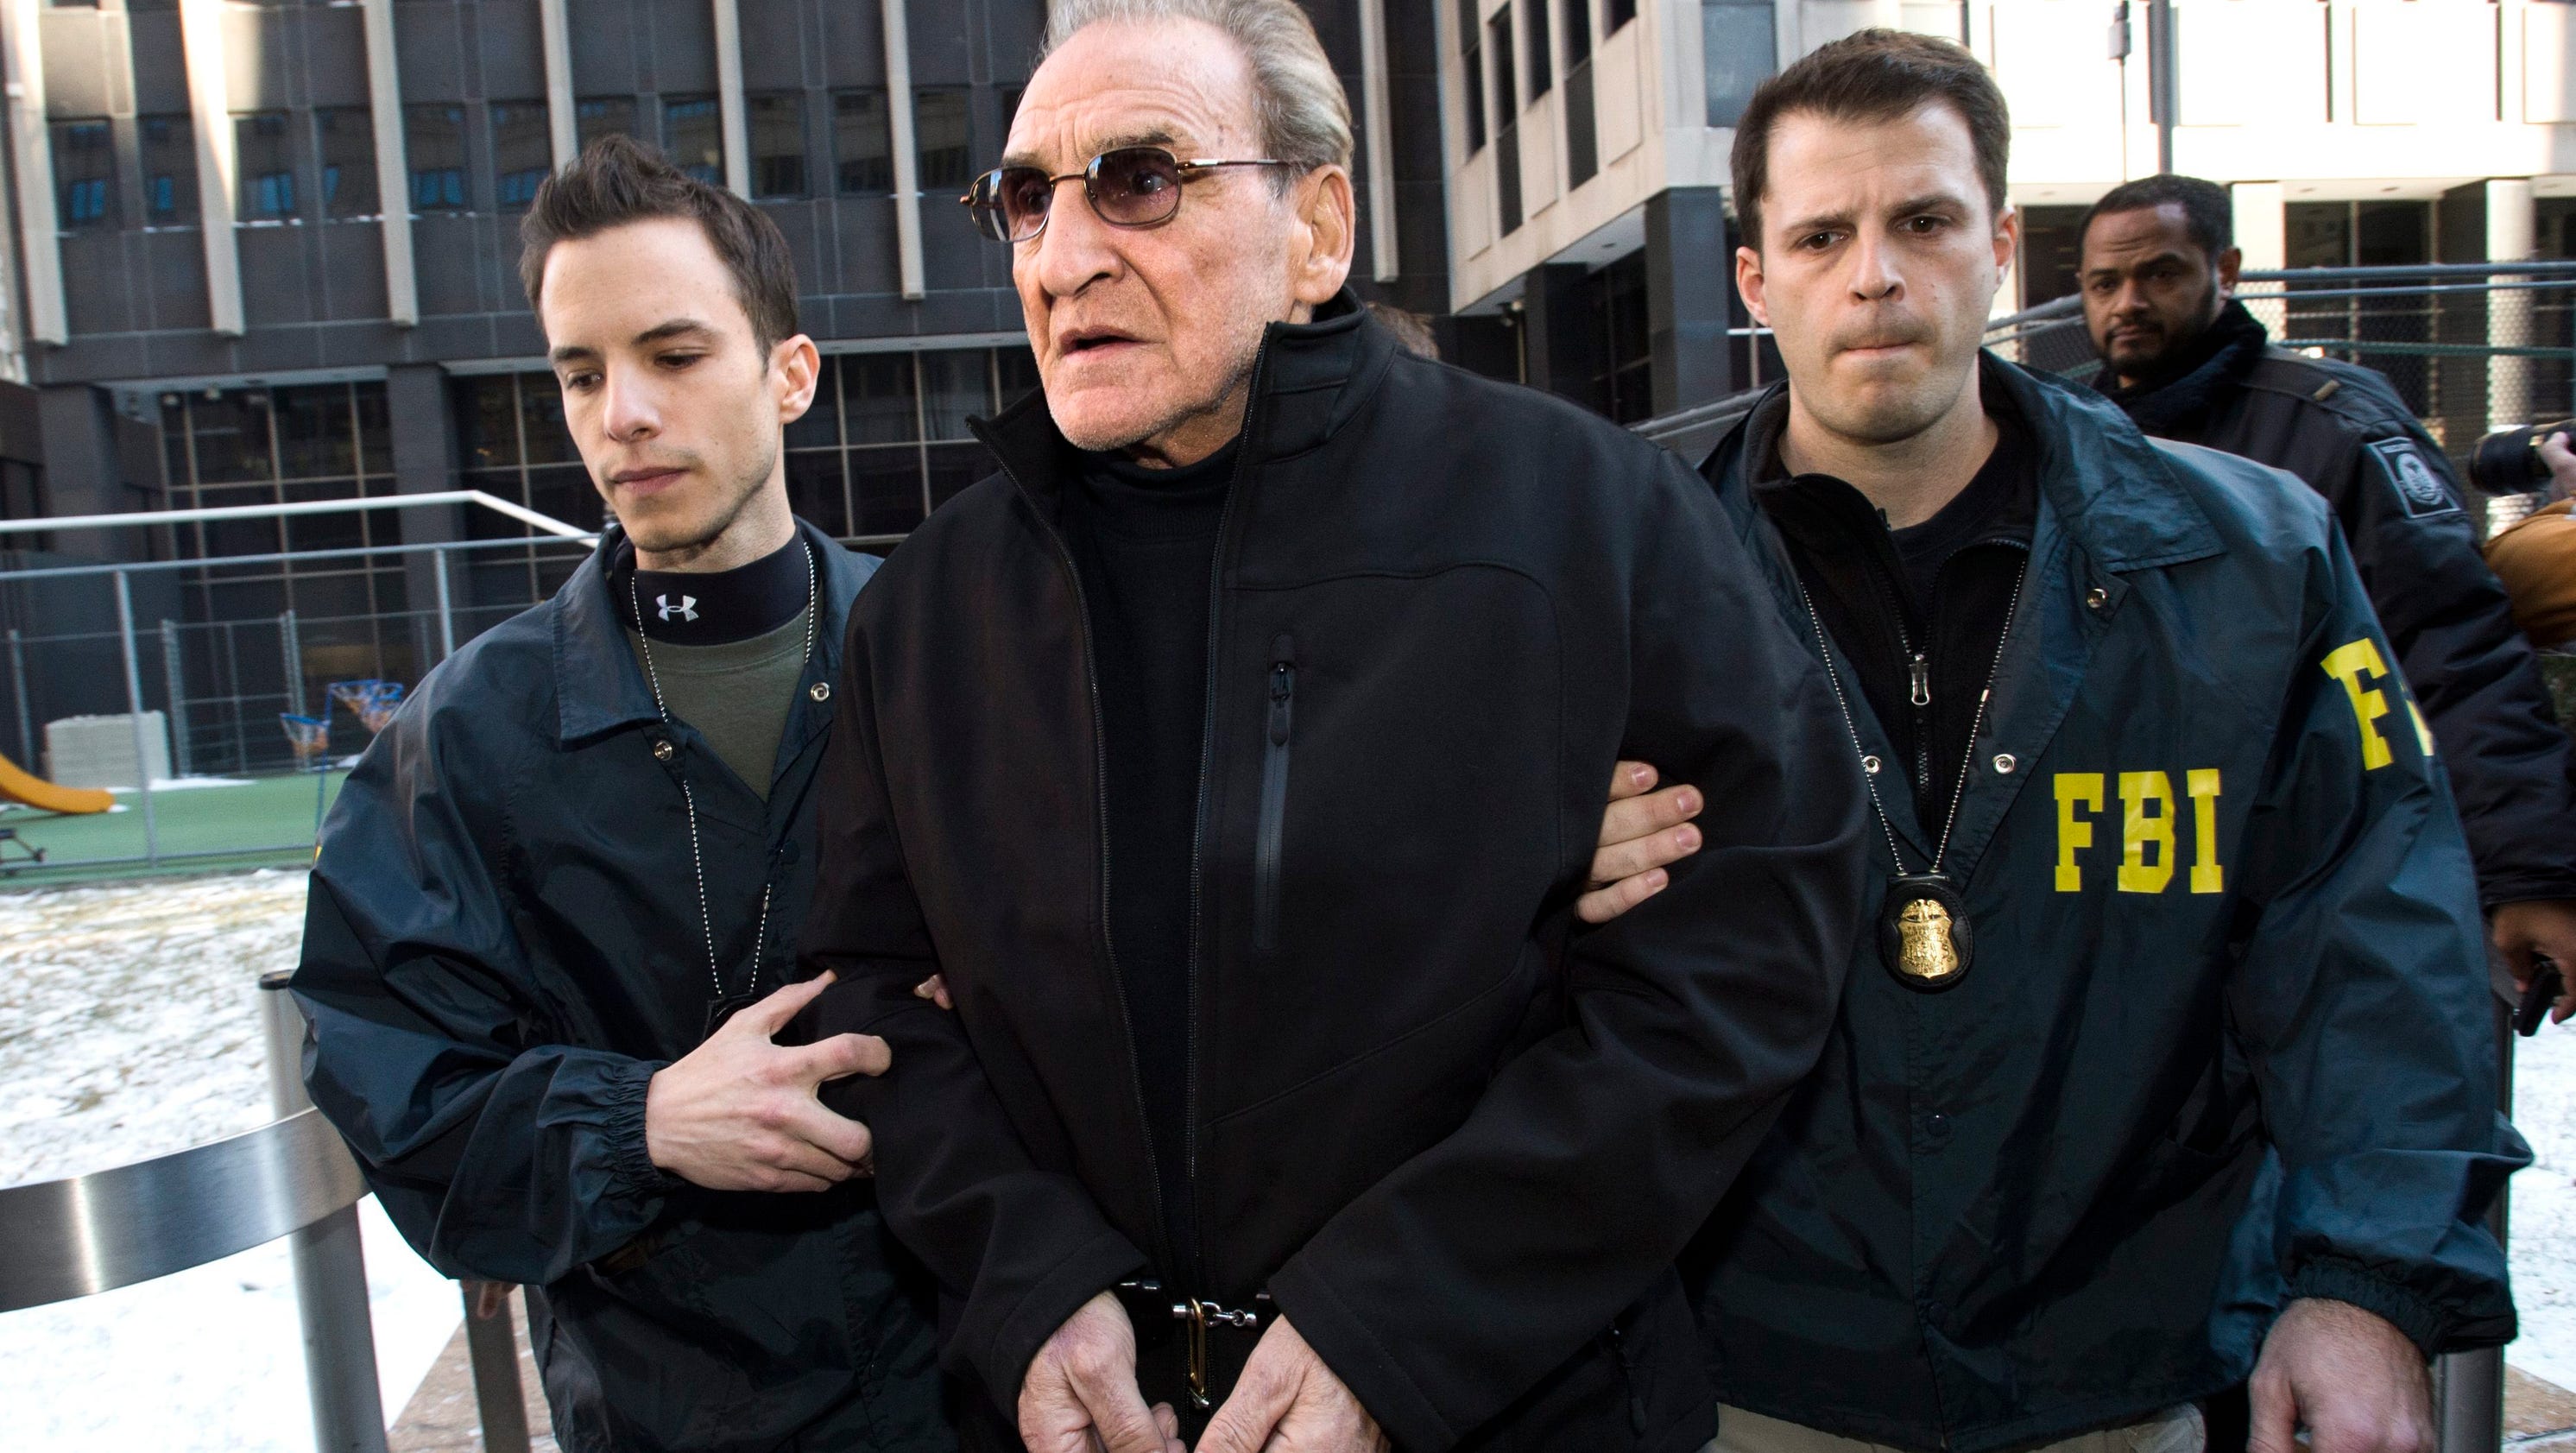 Reputed mobster charged in Lufthansa 'Goodfellas' heist